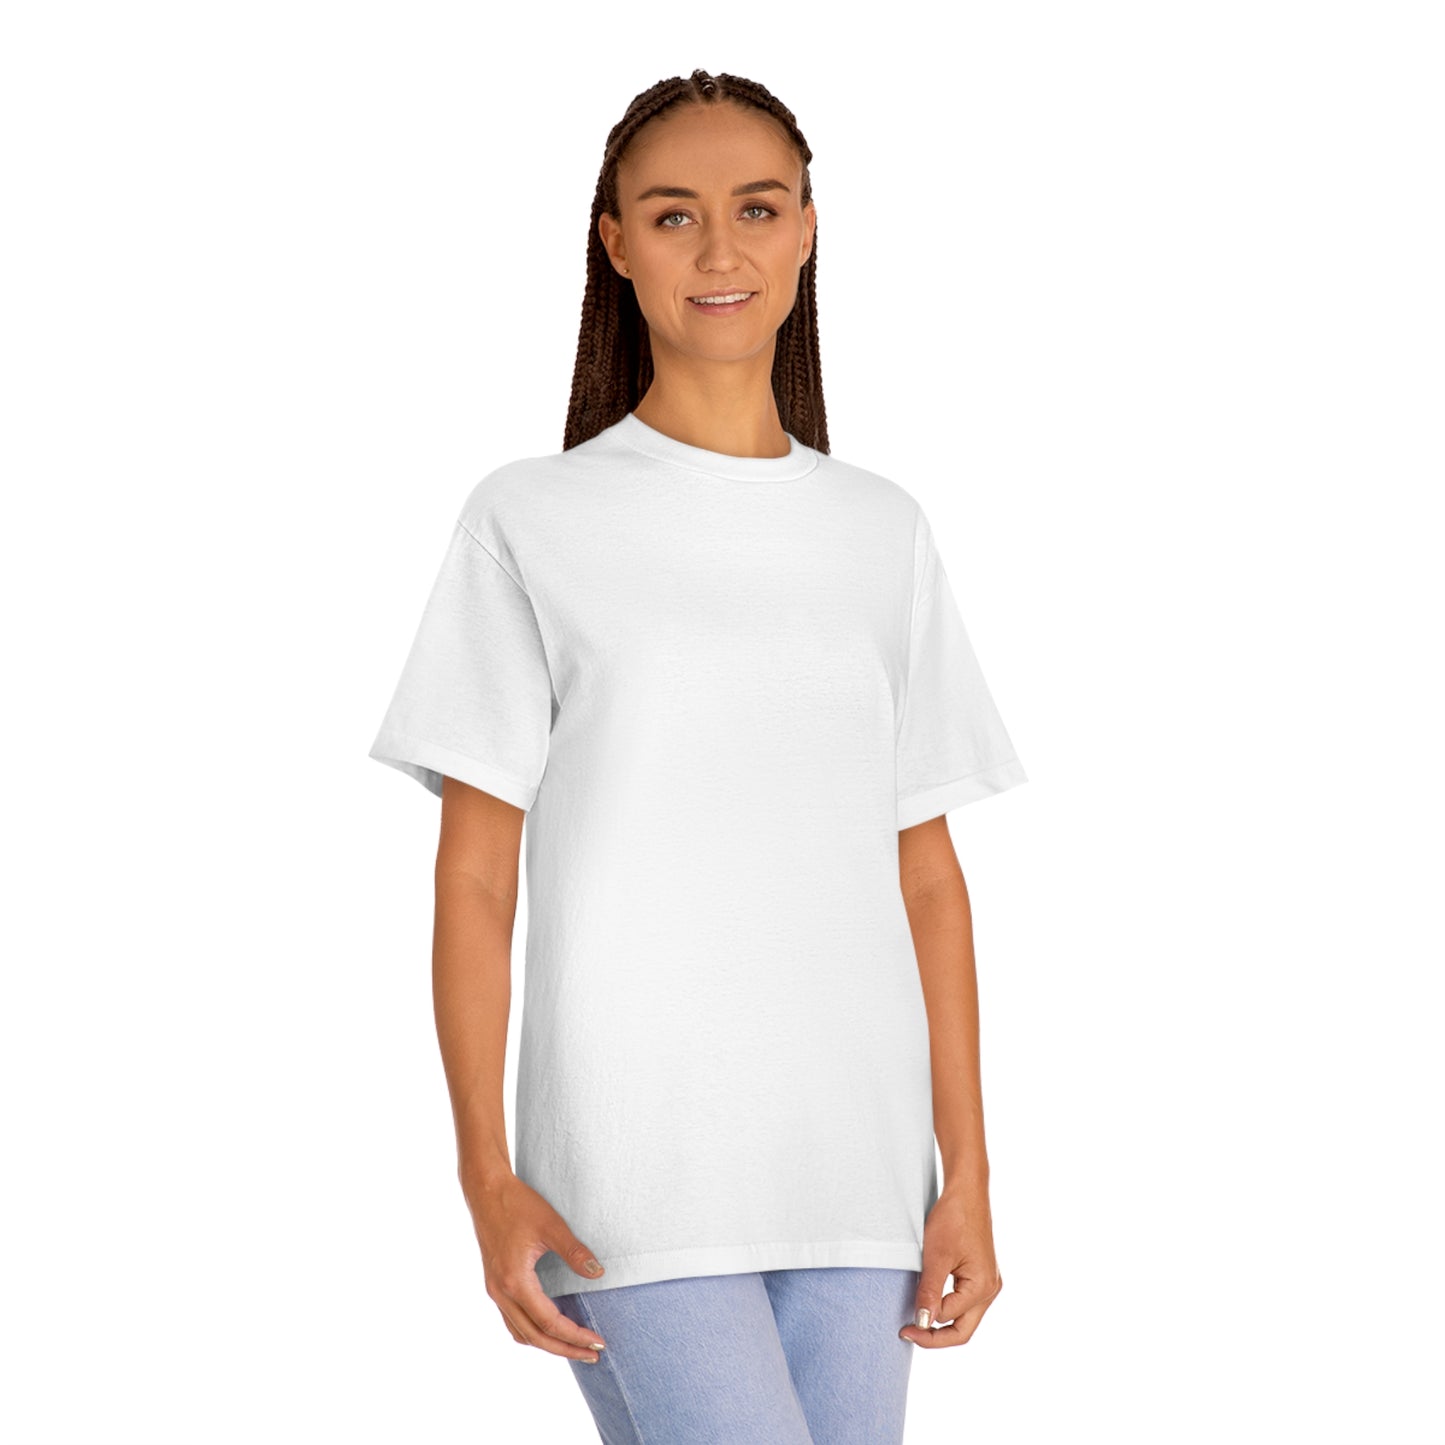 This is what an awesome mom looks like Unisex Classic Tee